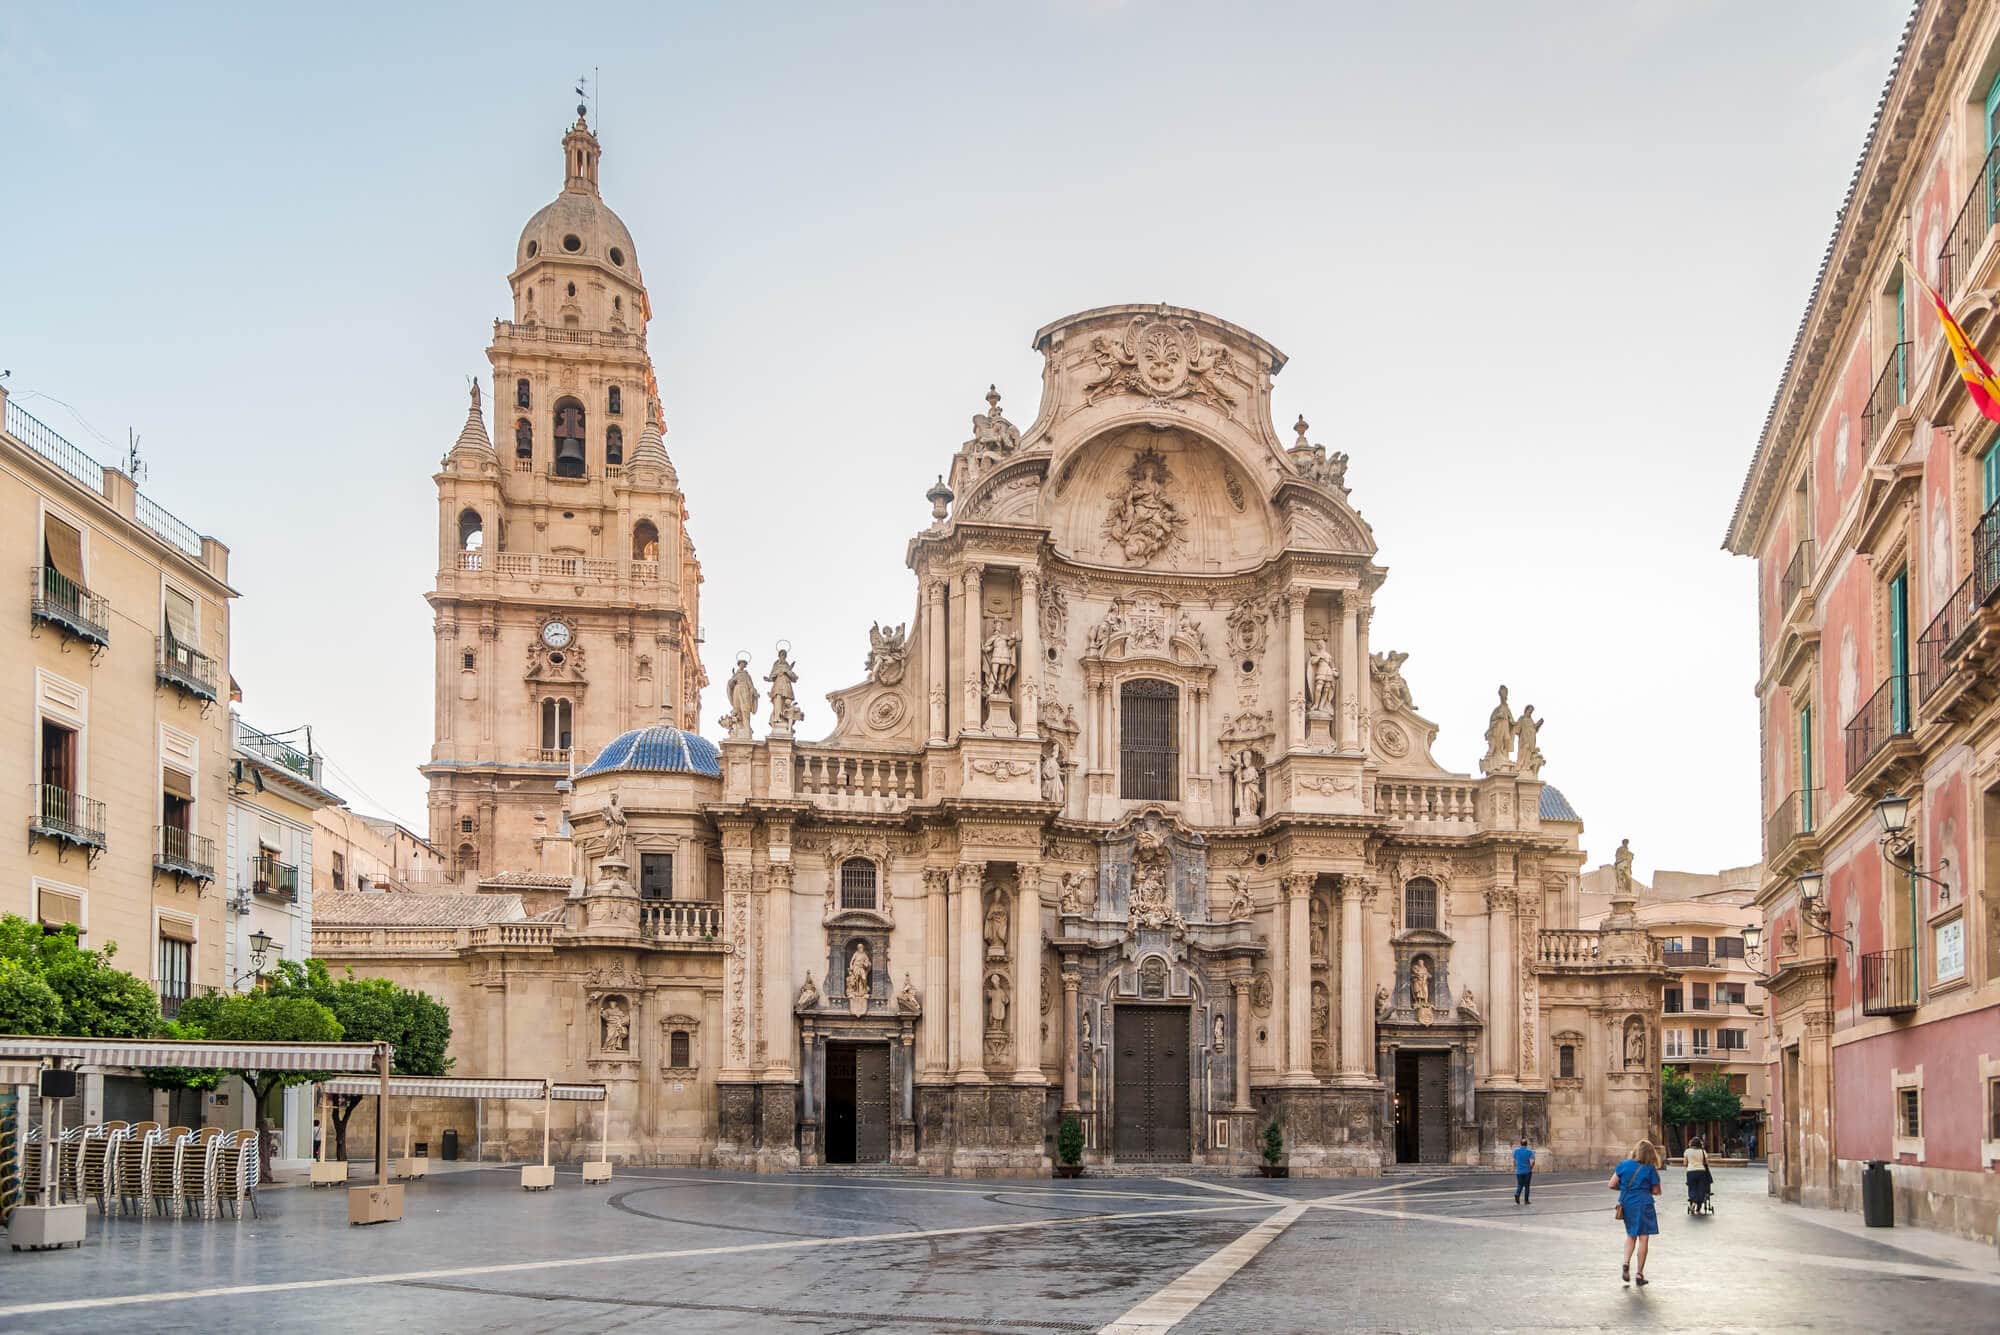 Region of Murcia, Spain: Top things to do - Murcia Cathedral